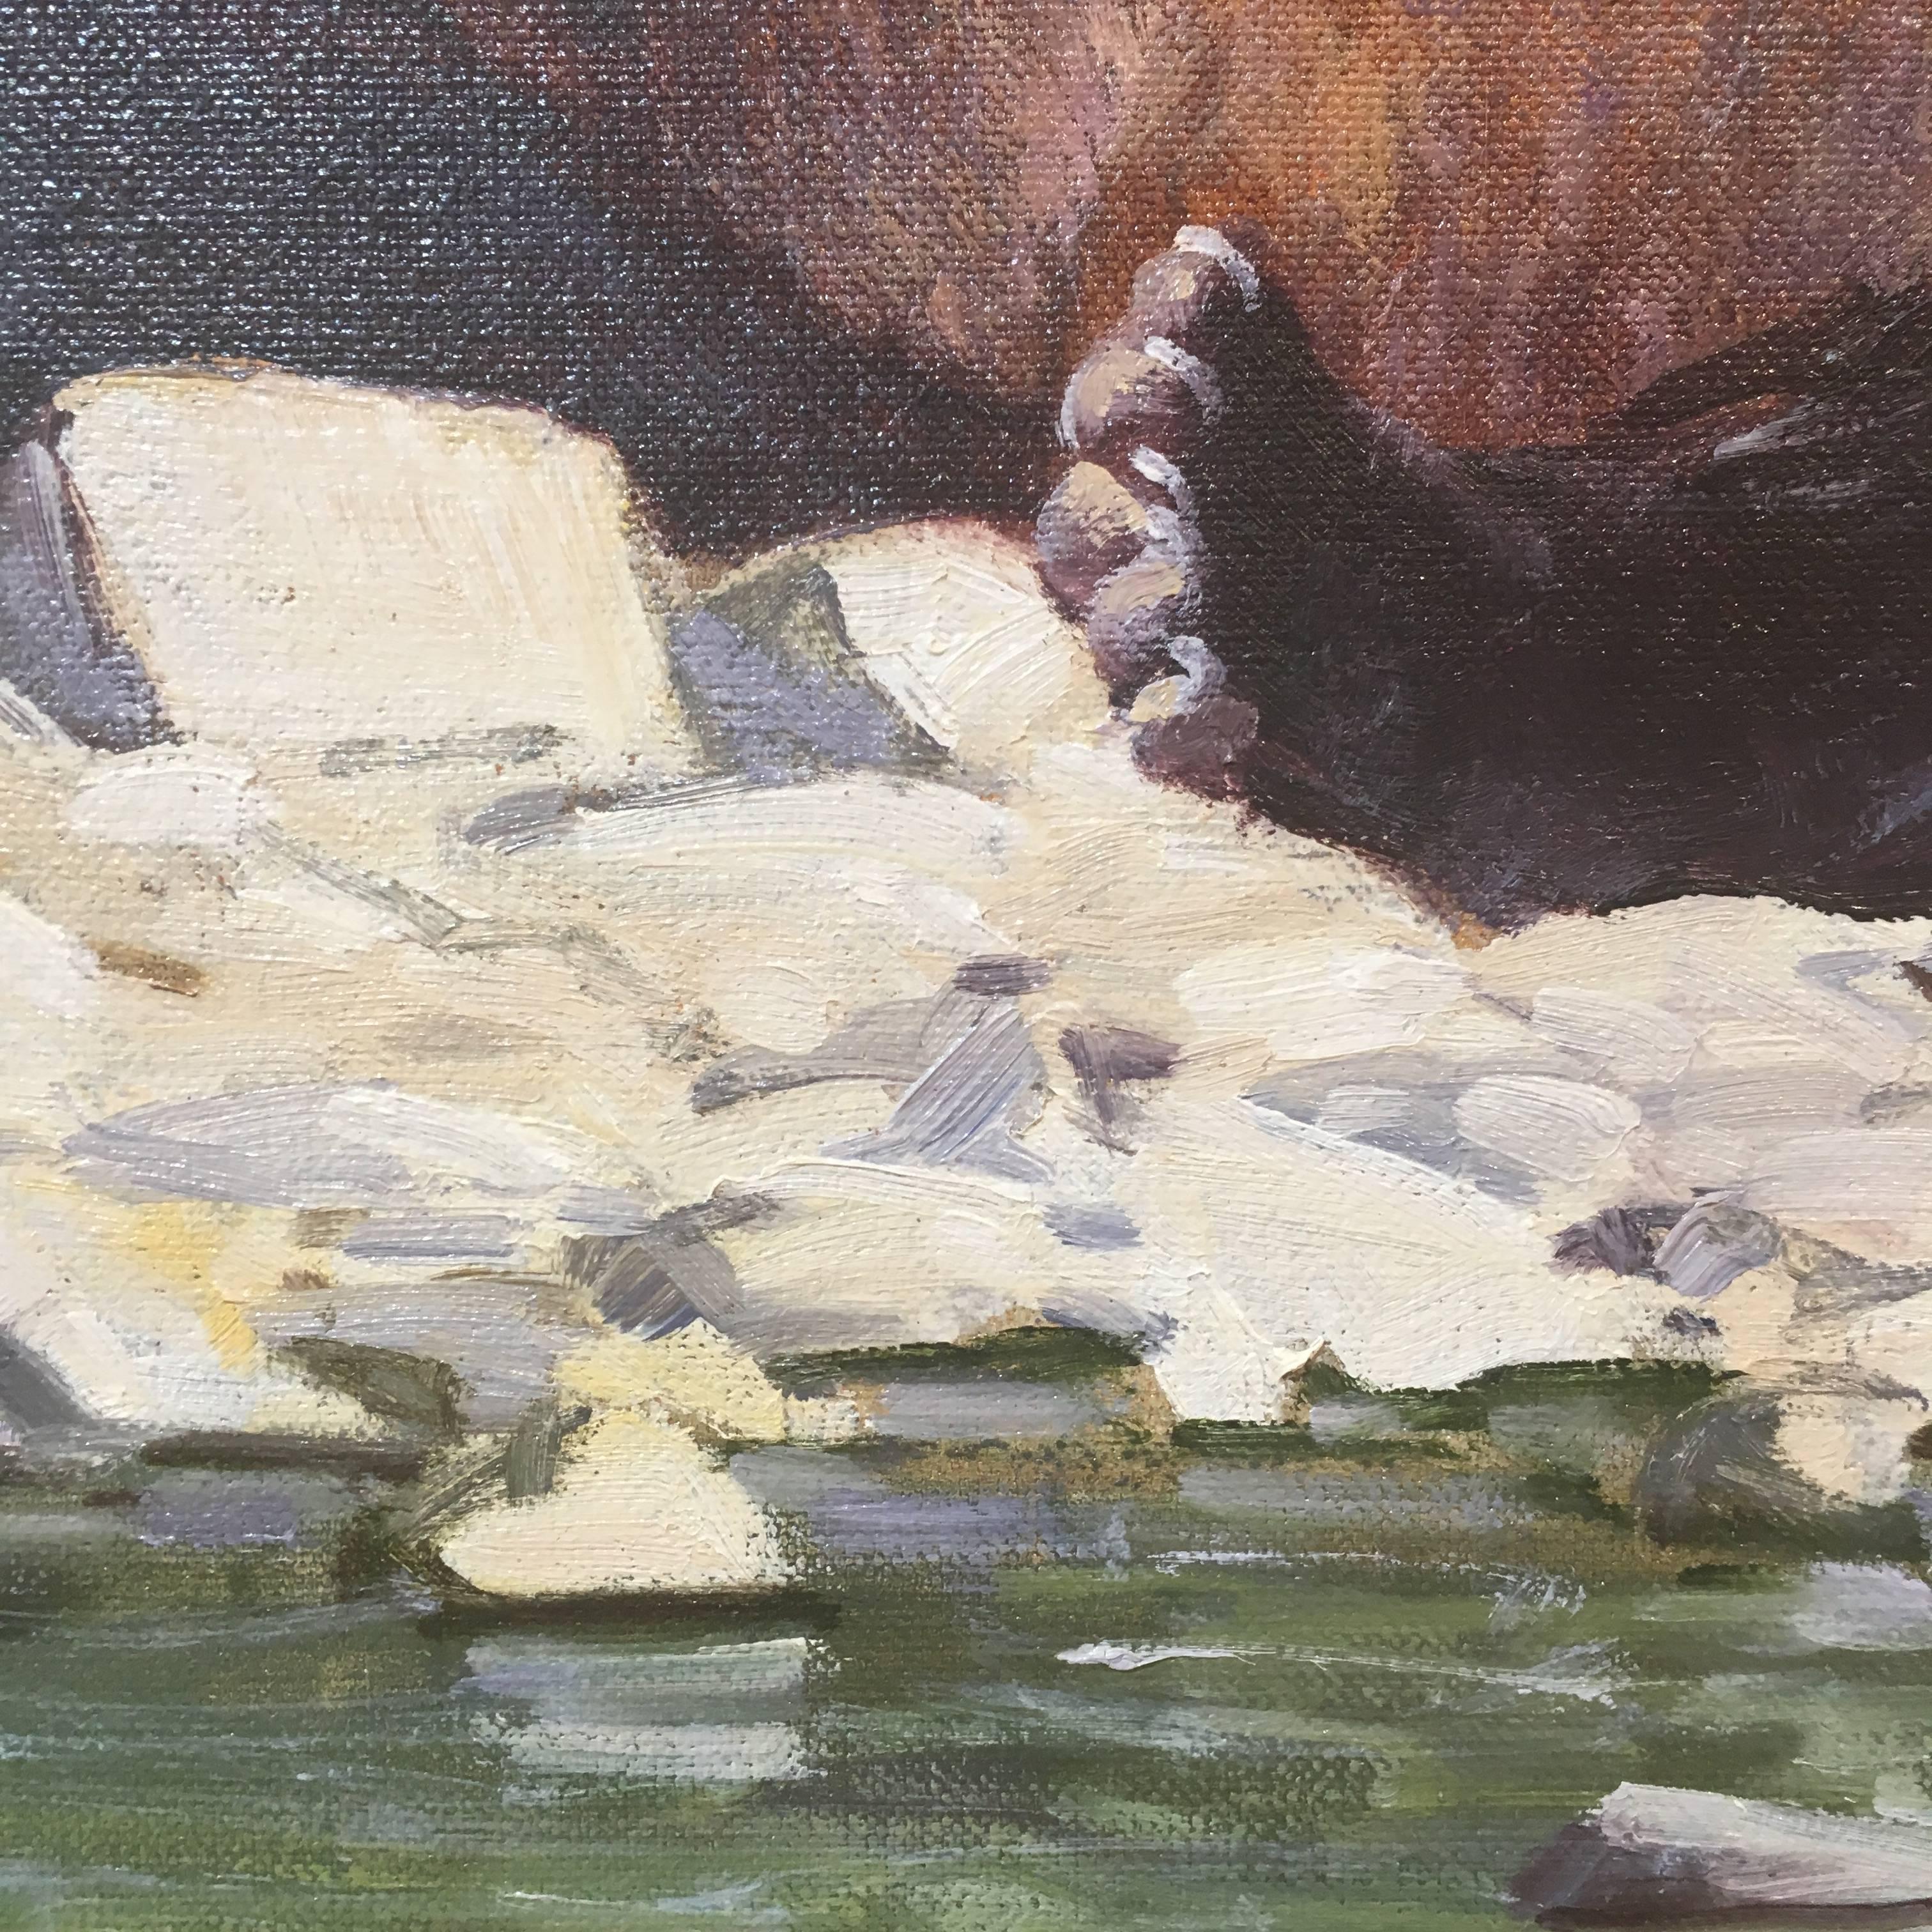 This is an oil painting of two almost matured grizzly bear cubs. They are sitting together on a bed of white rocks by a green river. They are looking compassionately into the sunlight in the upper right hand corner. The background is a blurred